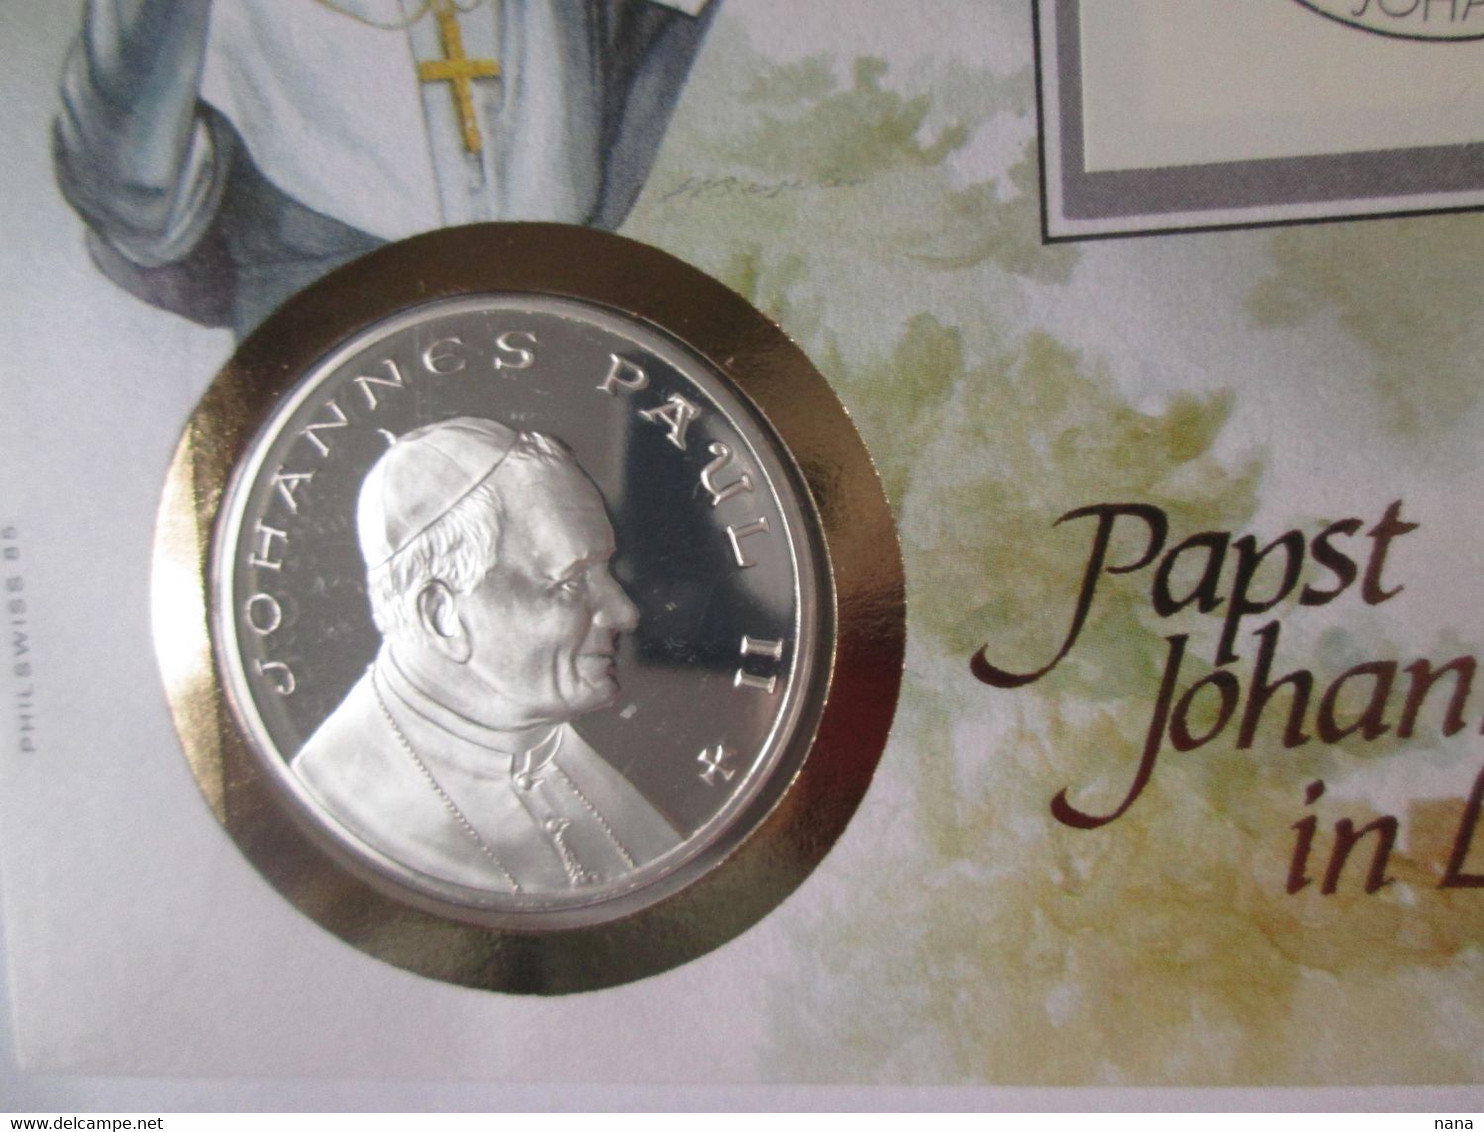 The Pope Johannes Paul II In Liechtenstein 1985 Envelope With Silver Commemorative Medal 999.9 Limited Edition 4000 Pc. - Storia Postale